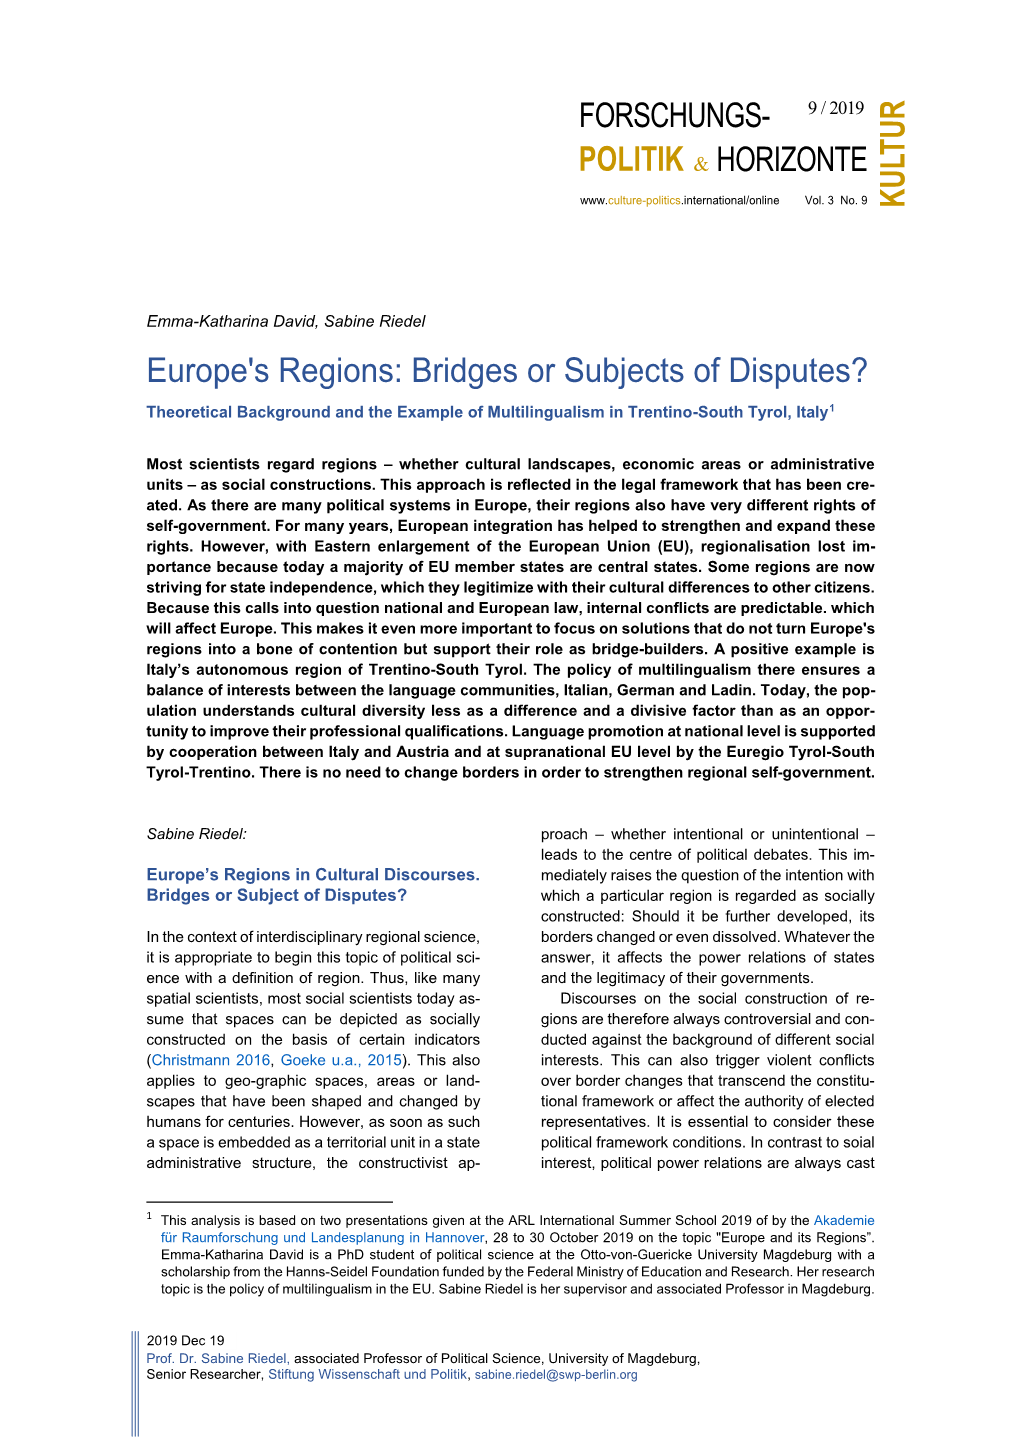 Europe's Regions: Bridges Or Subjects of Disputes? Theoretical Background and the Example of Multilingualism in Trentino-South Tyrol, Italy1